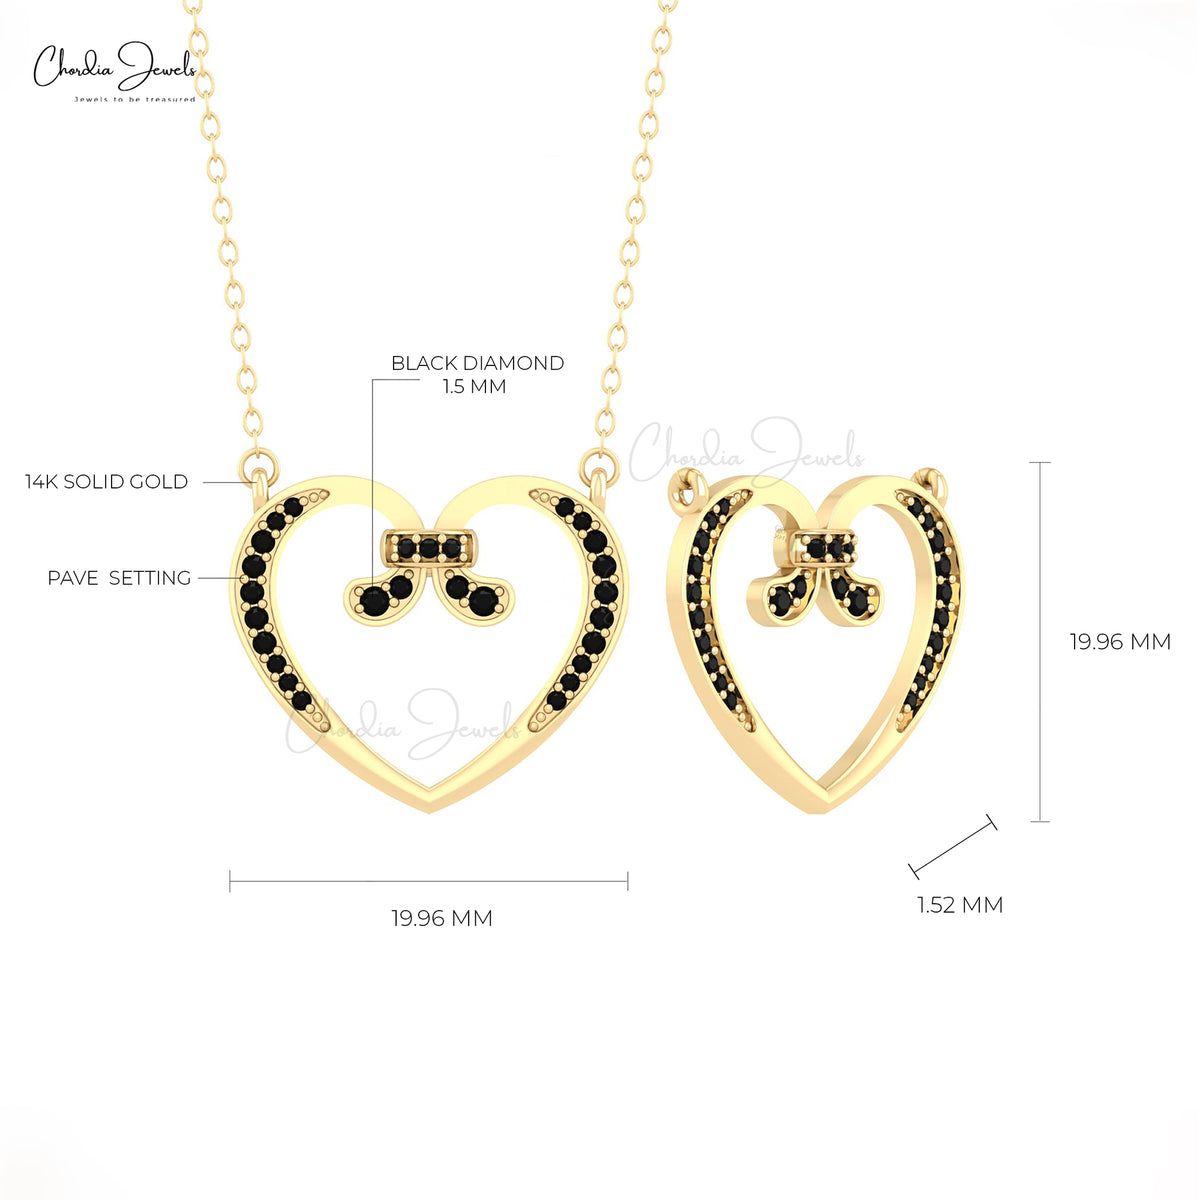 Shop Our Latest Collection of Genuine Black Diamond Heart Shape